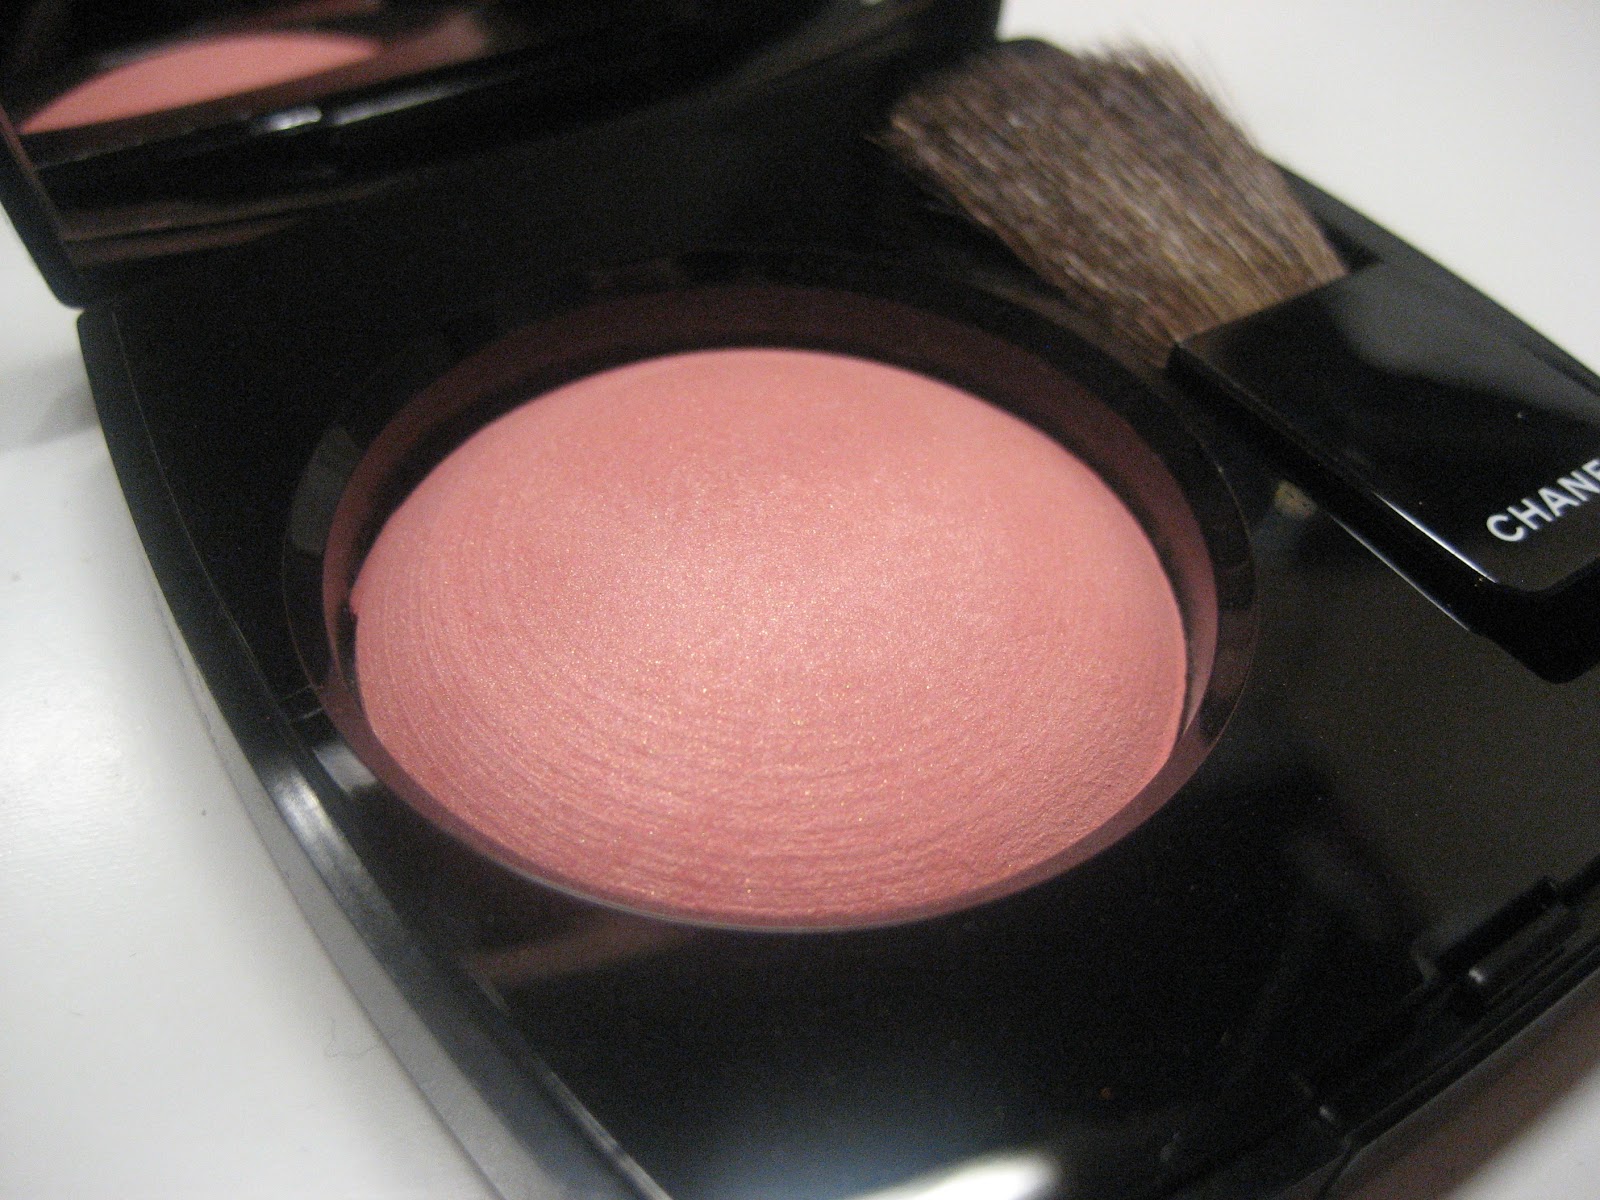 CHANEL Joues Contraste Powder Blush in 13 Candy - Reviews